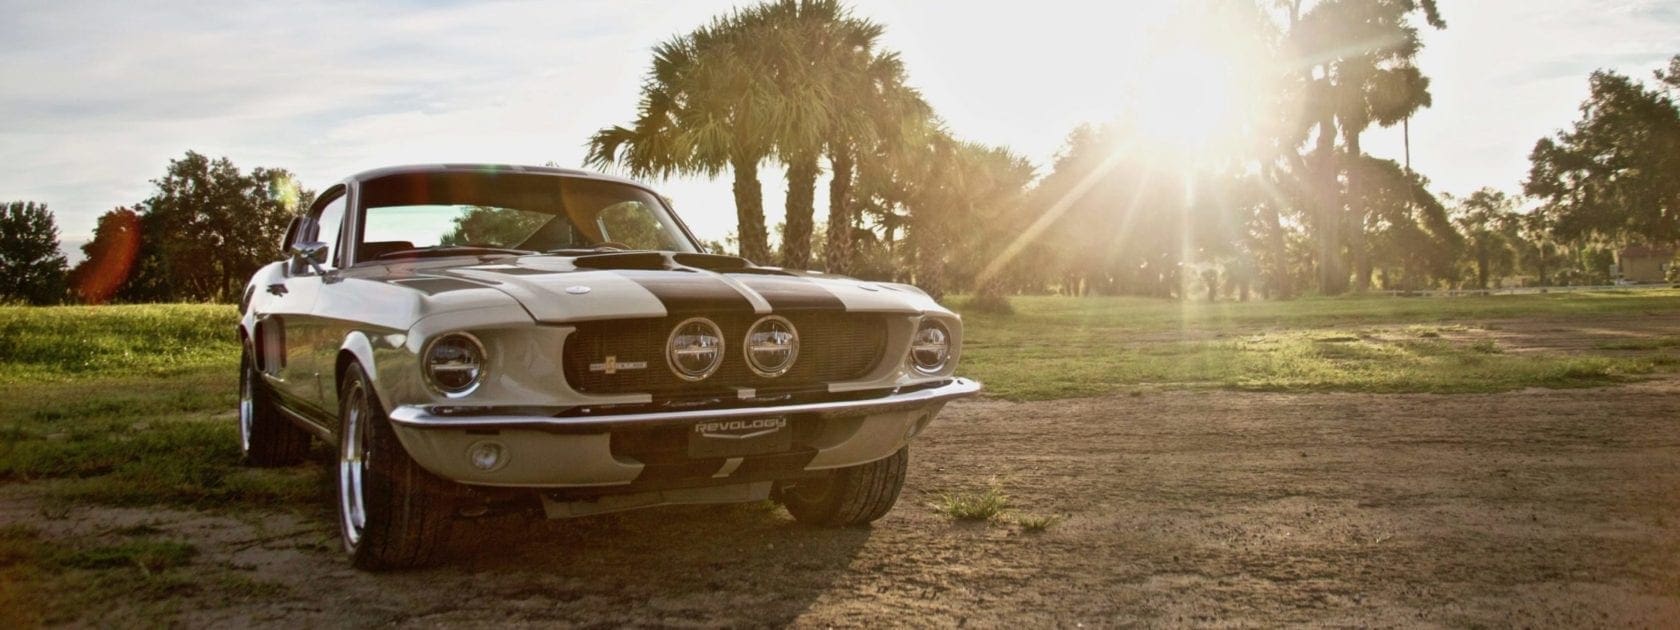 Revology builds modern memories one Mustang at a time